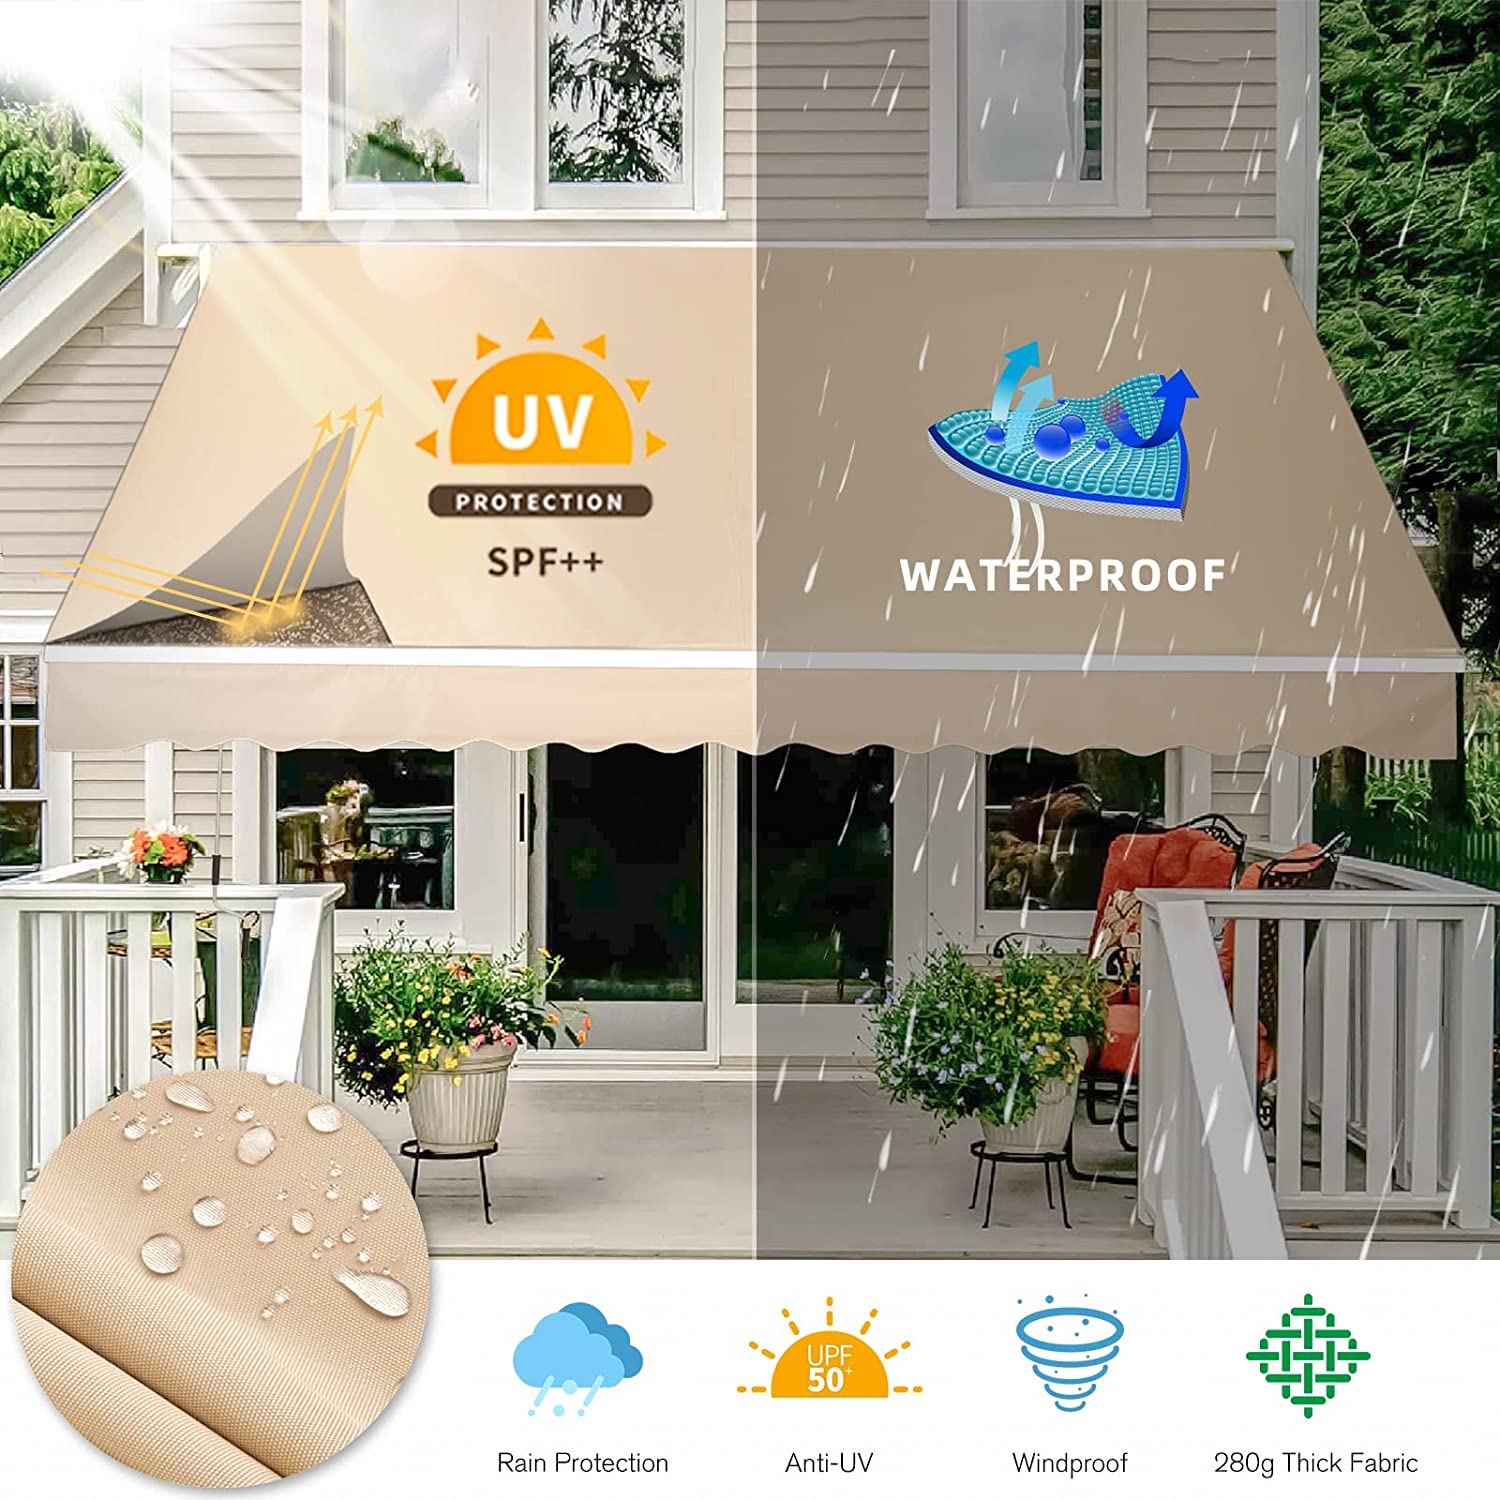 AECOJOY 13' x 8' Manual Retractable Patio Awning,Outdoor Awning Retractable Sunshade Shelter-Beige - image 5 of 6